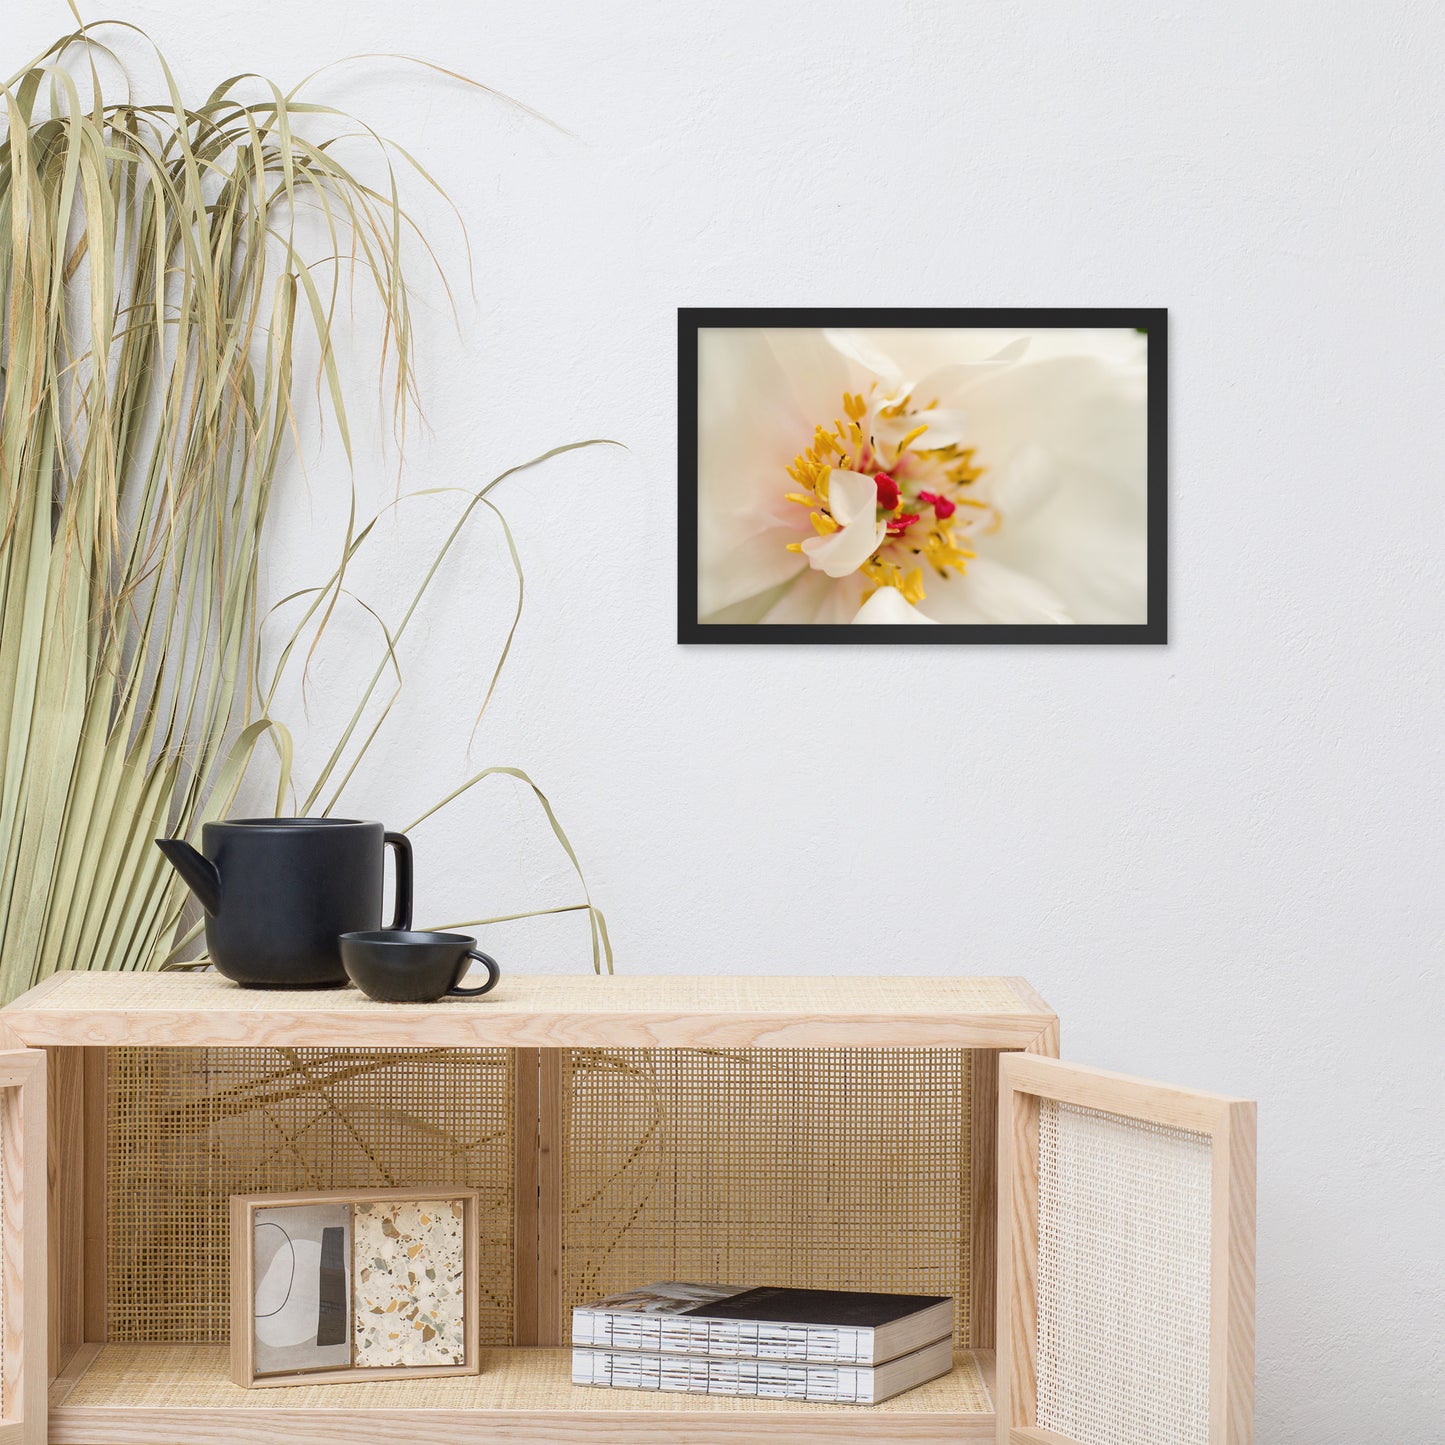 Eye of Peony Floral Nature Photo Framed Wall Art Print